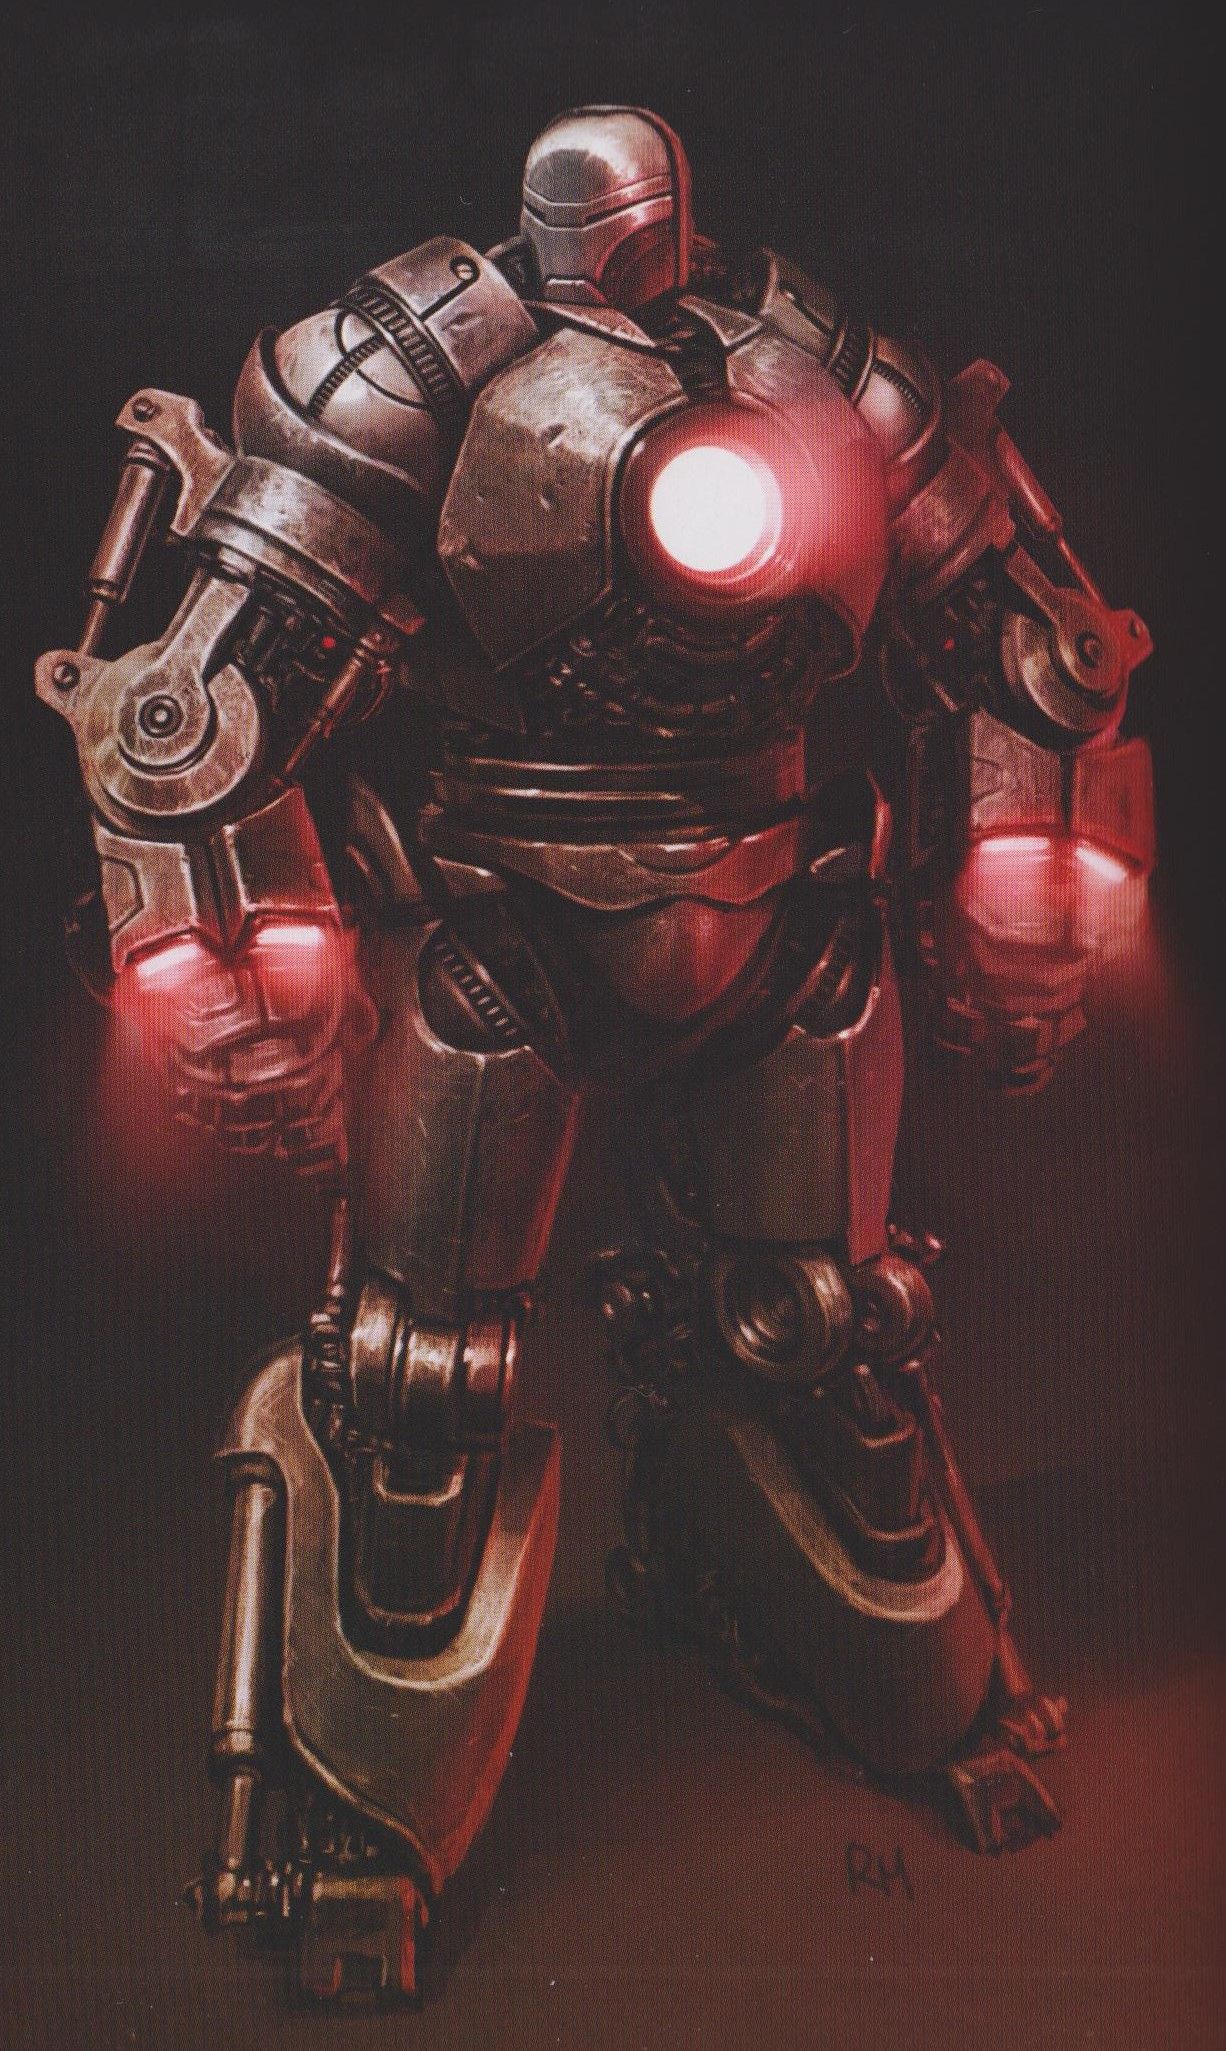 IRON MAN: The Villainous Iron Monger Is Unrecognisable In This